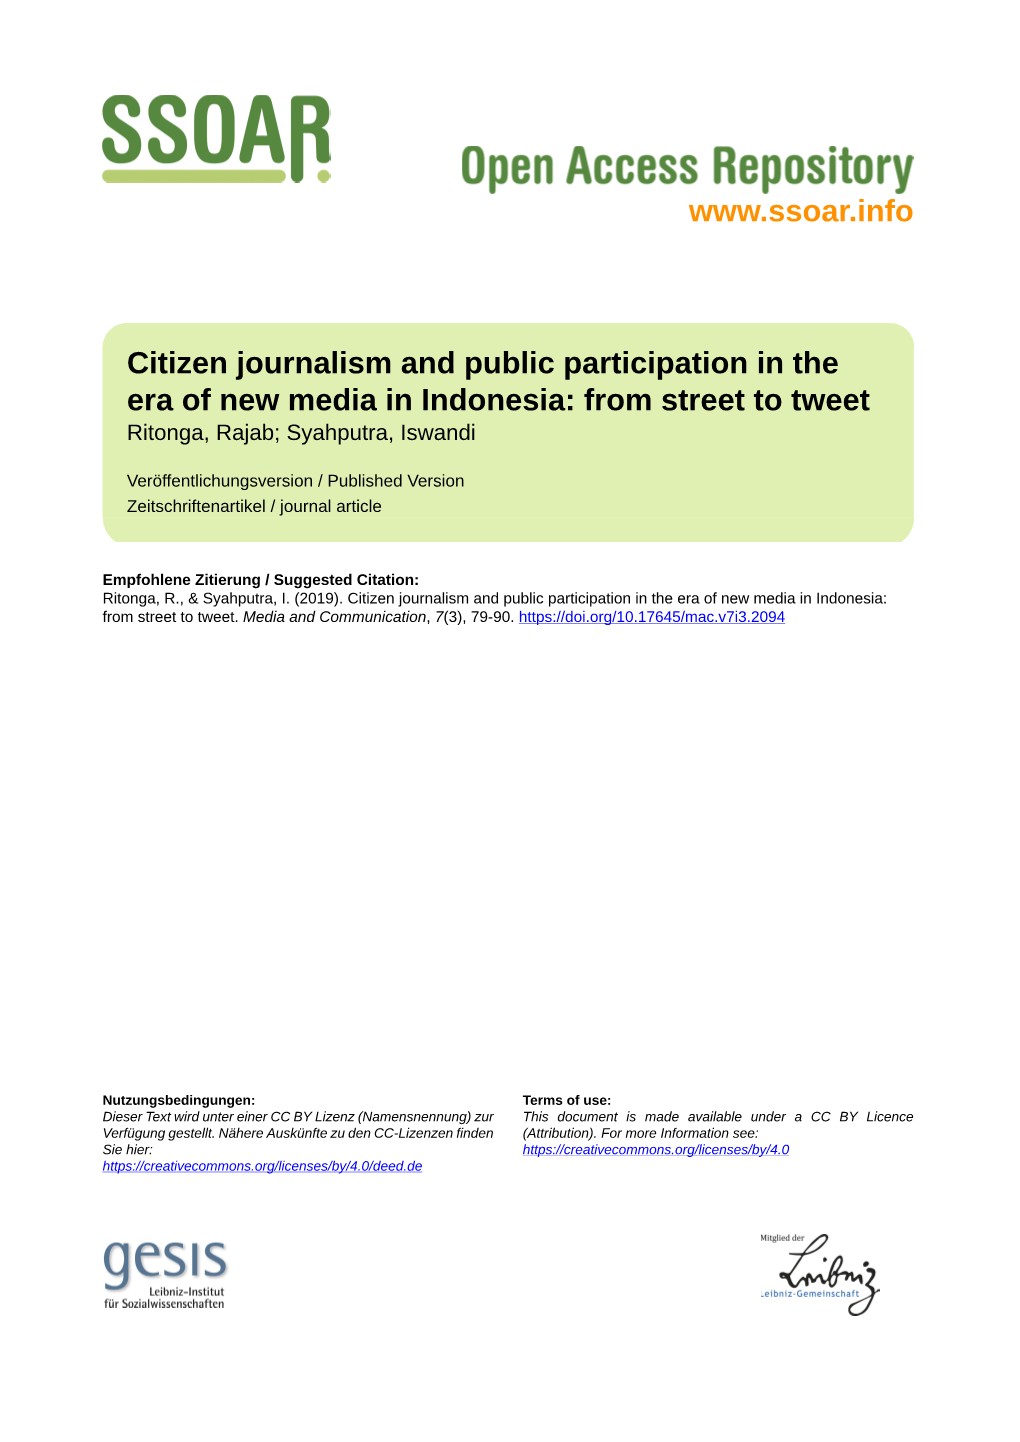 Citizen Journalism and Public Participation in the Era of New Media in Indonesia: from Street to Tweet Ritonga, Rajab; Syahputra, Iswandi